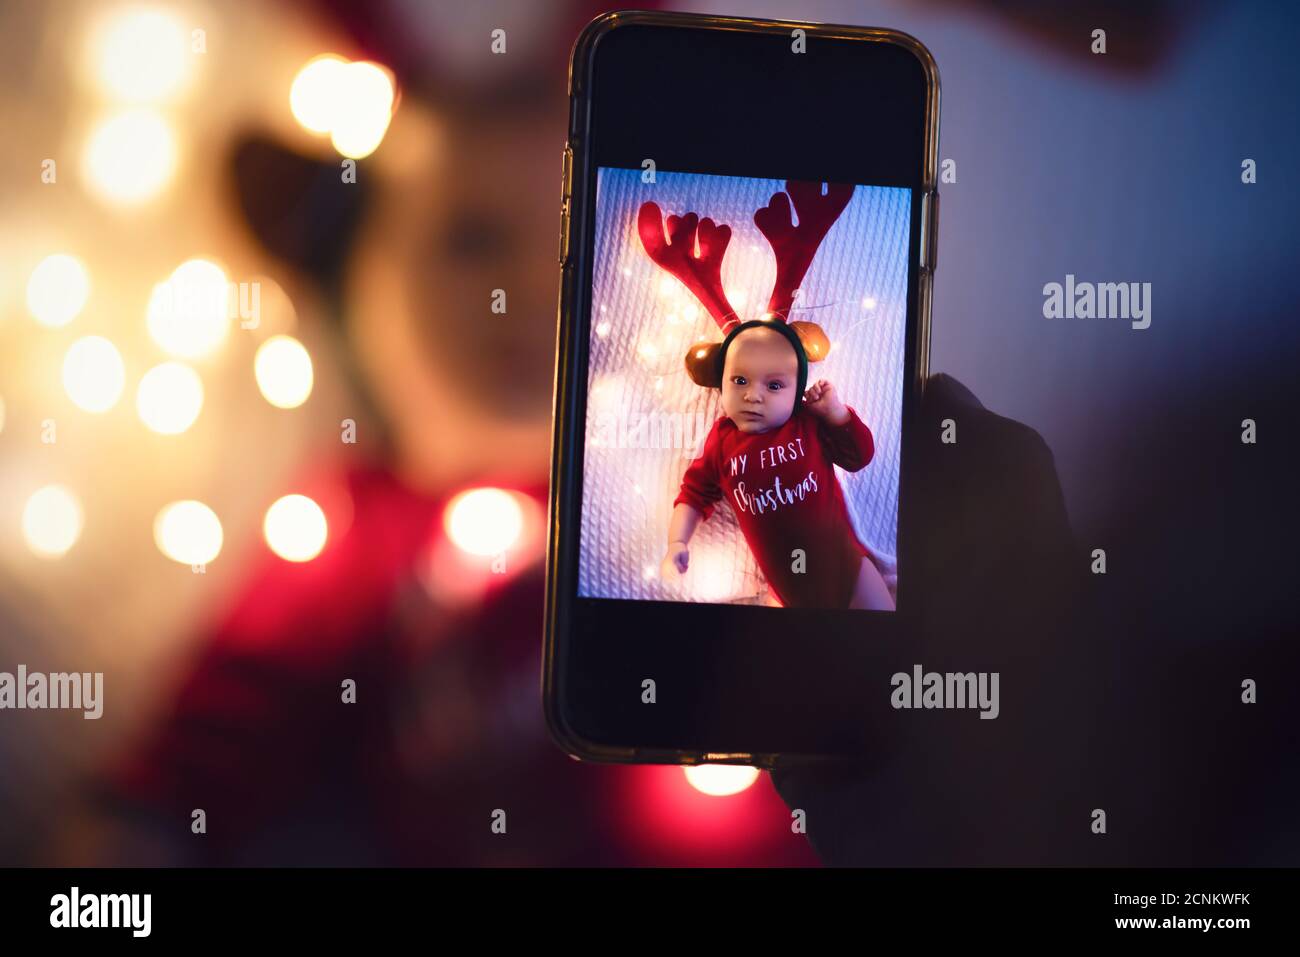 Parent taking photo of a baby with smartphone. Digital family memories. Stock Photo